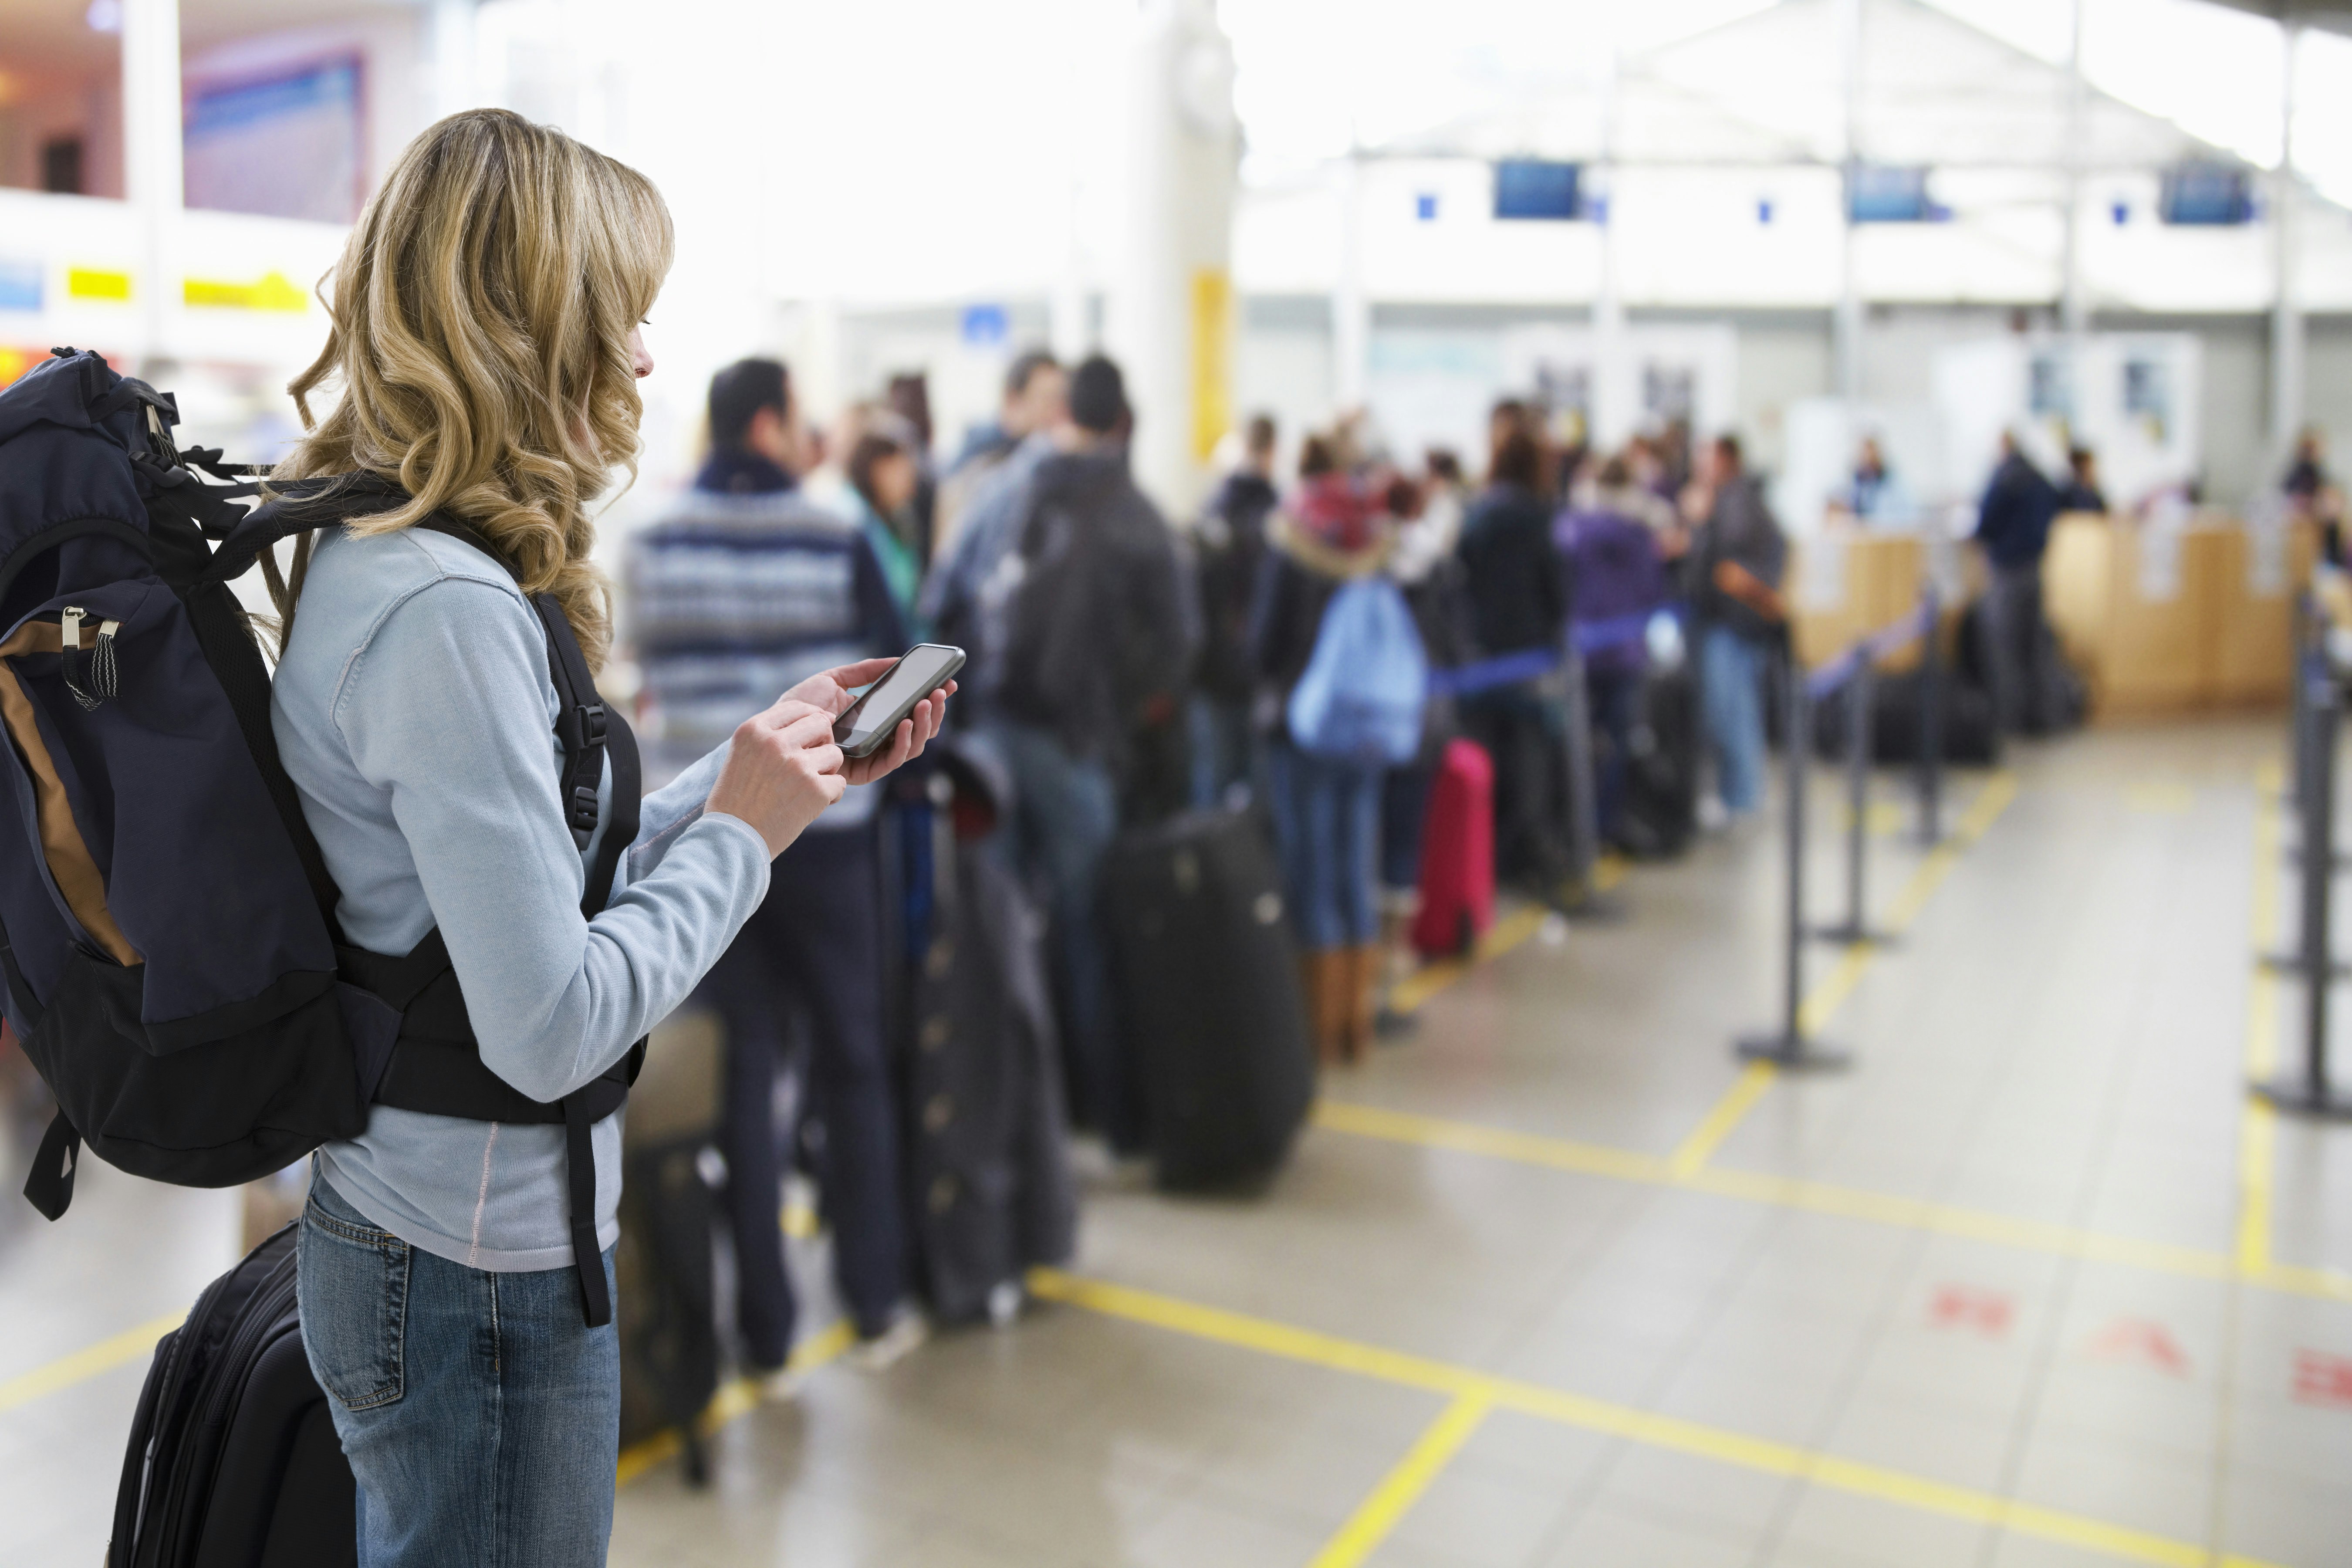 The photo shows a girl texting at an airport check-in